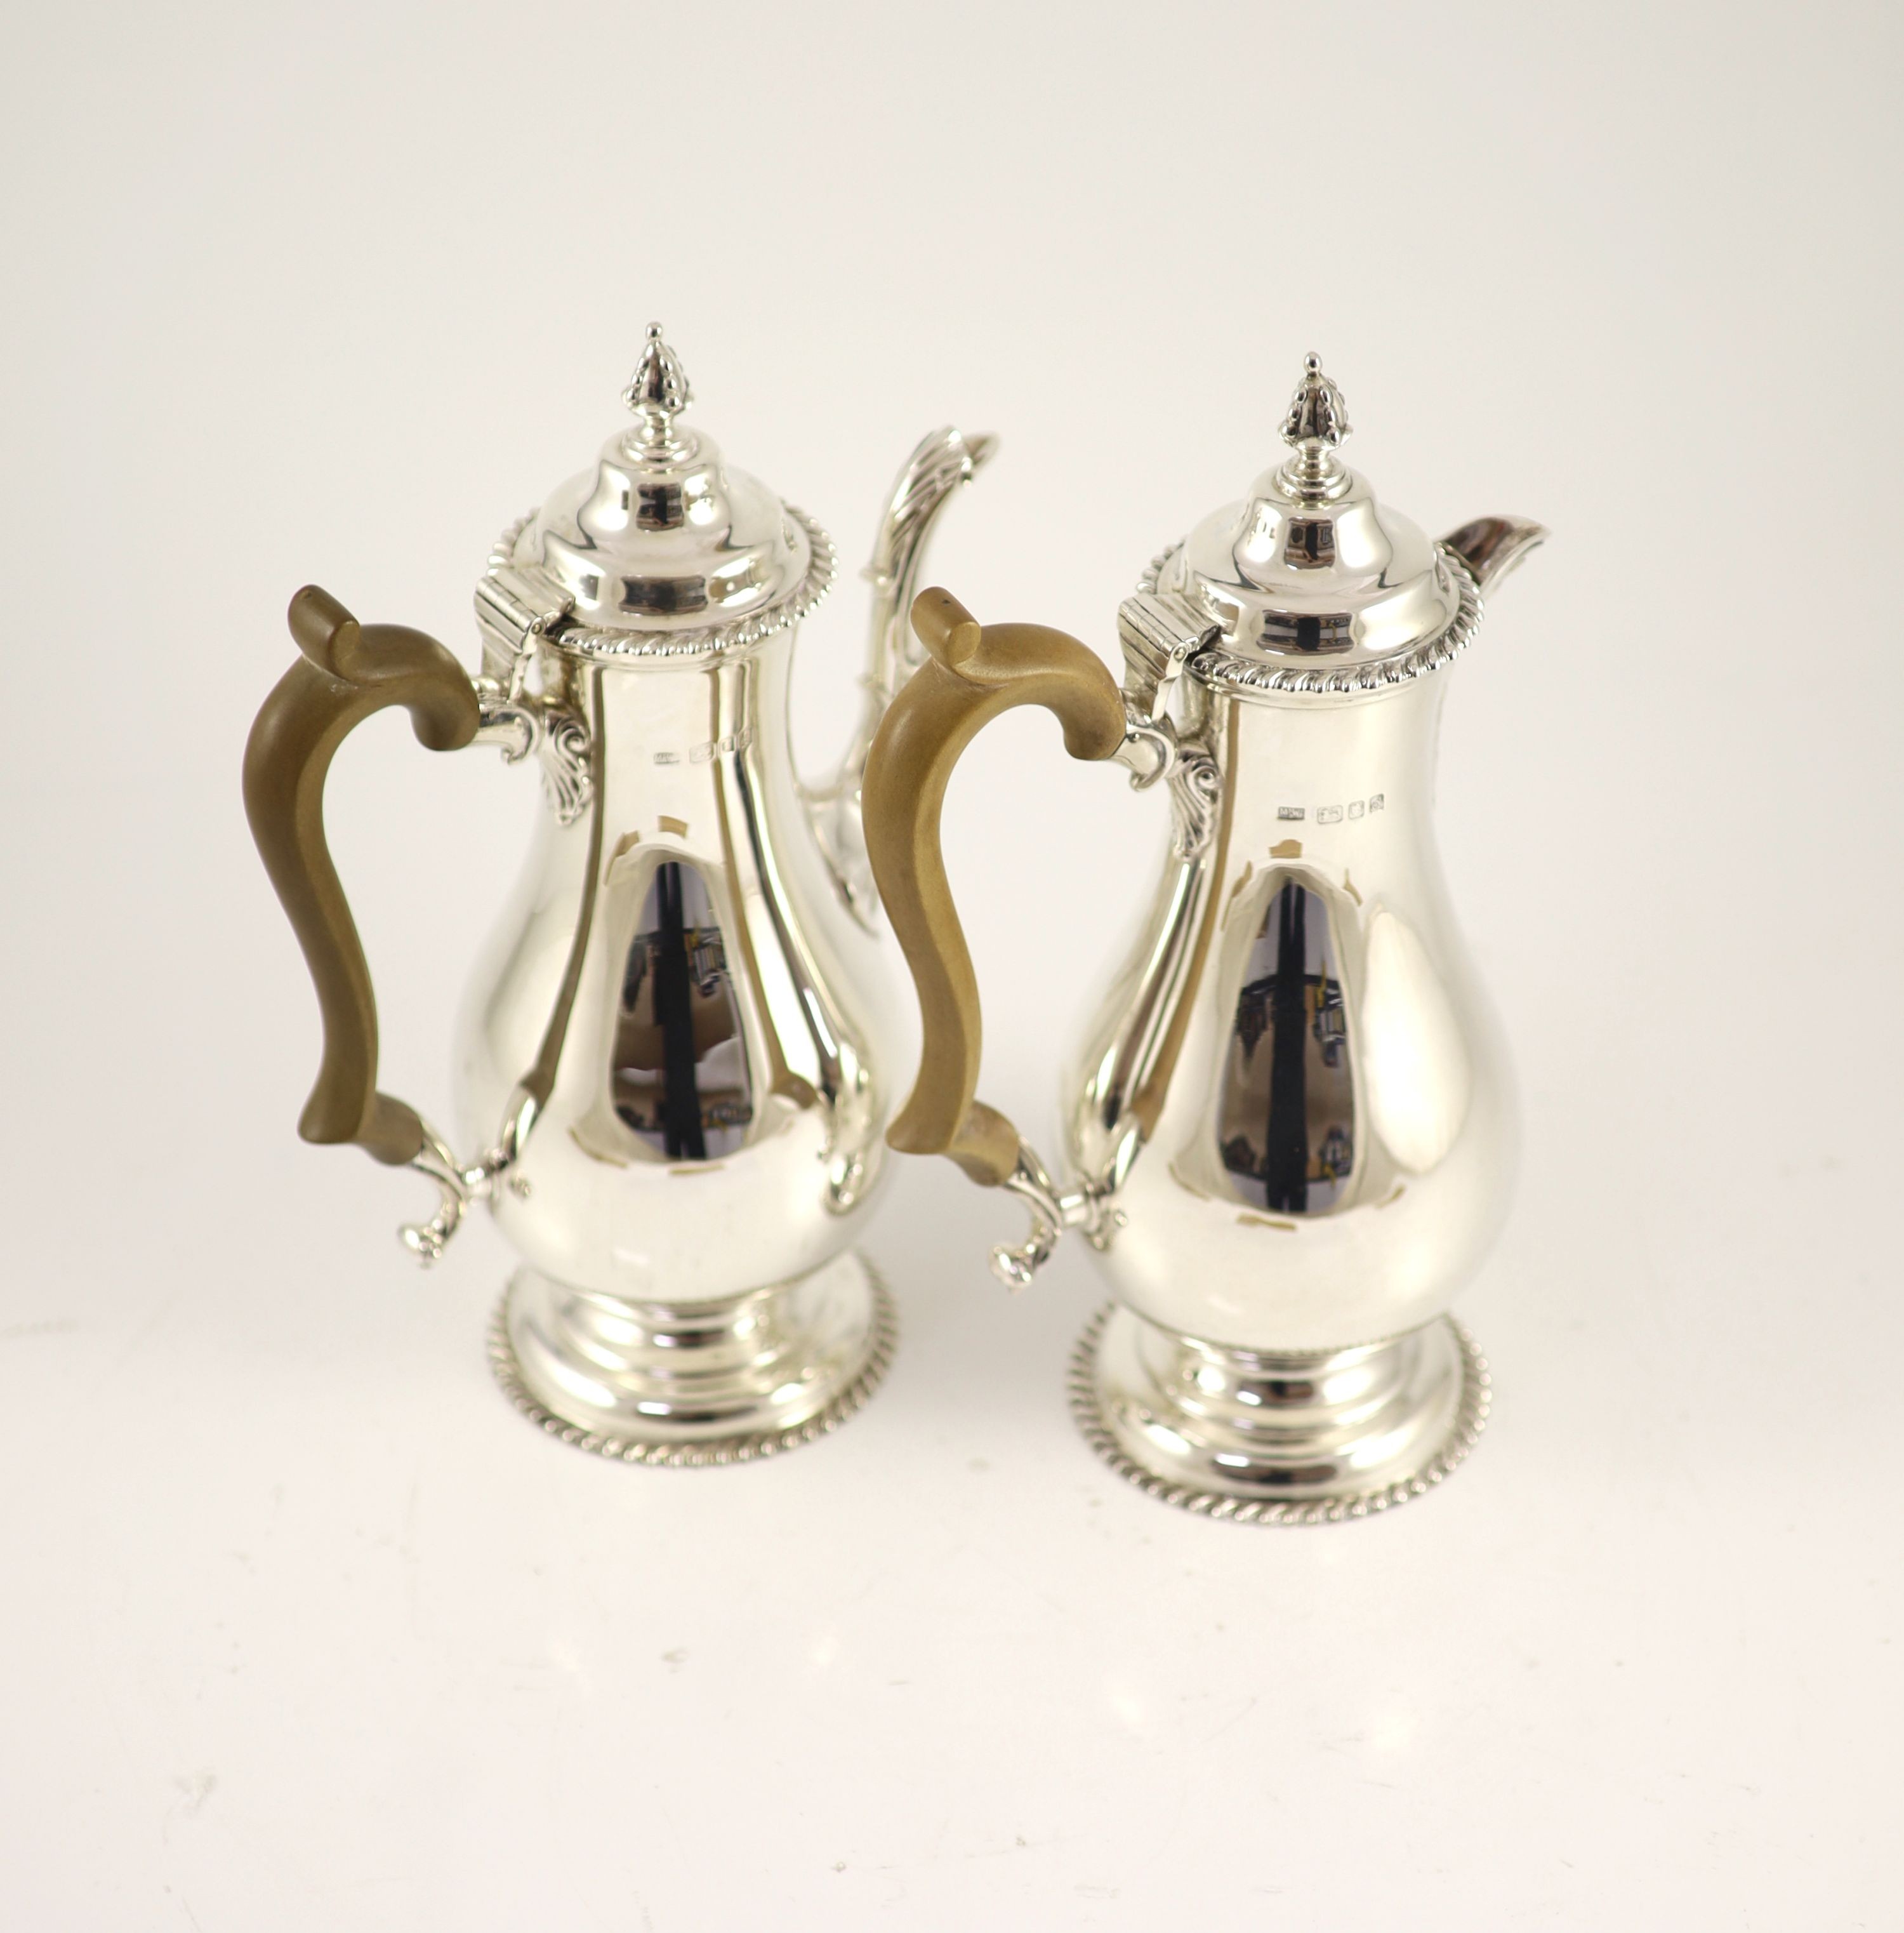 A Mappin & Webb 18th century style silver coffee pot with wood handle and matching hot water jug,